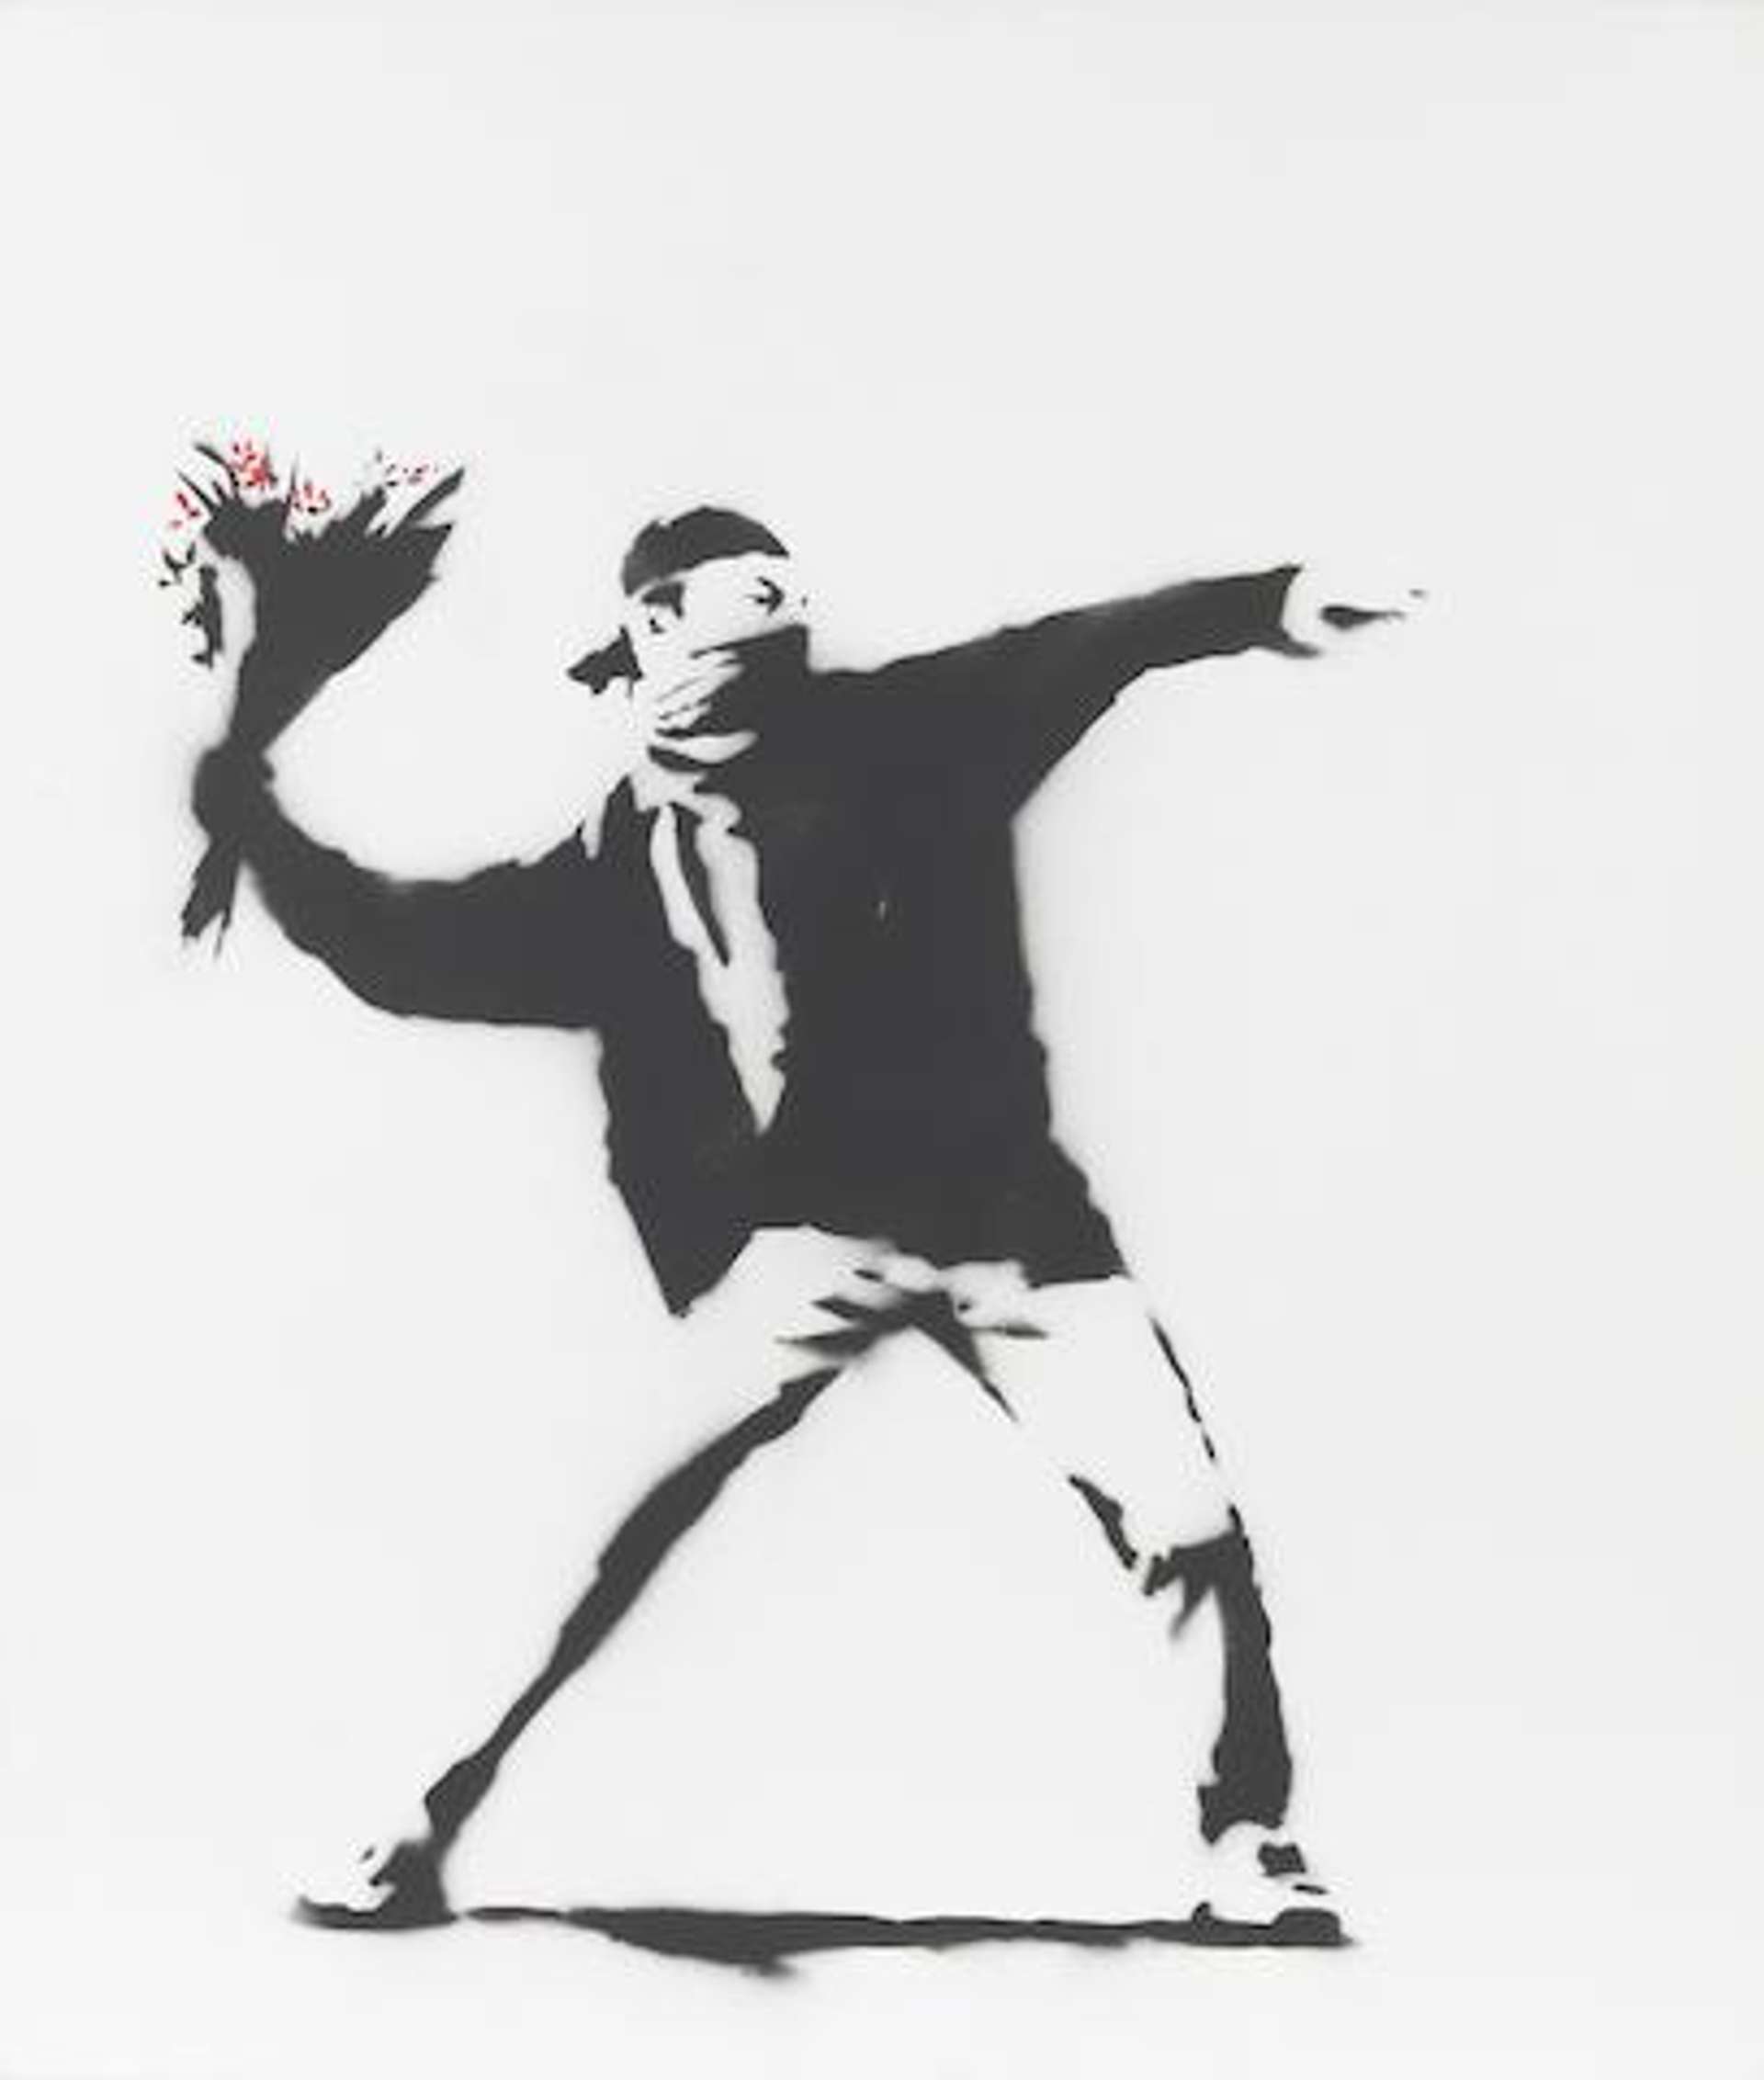 This image shows a man wearing a kerchief covering his mouth and nose and a baseball cap. The man is rendered using spray paint and a stencil in black and white. Captured in motion, the man appears to be throwing a bouquet of flowers at someone or something outside of the composition.